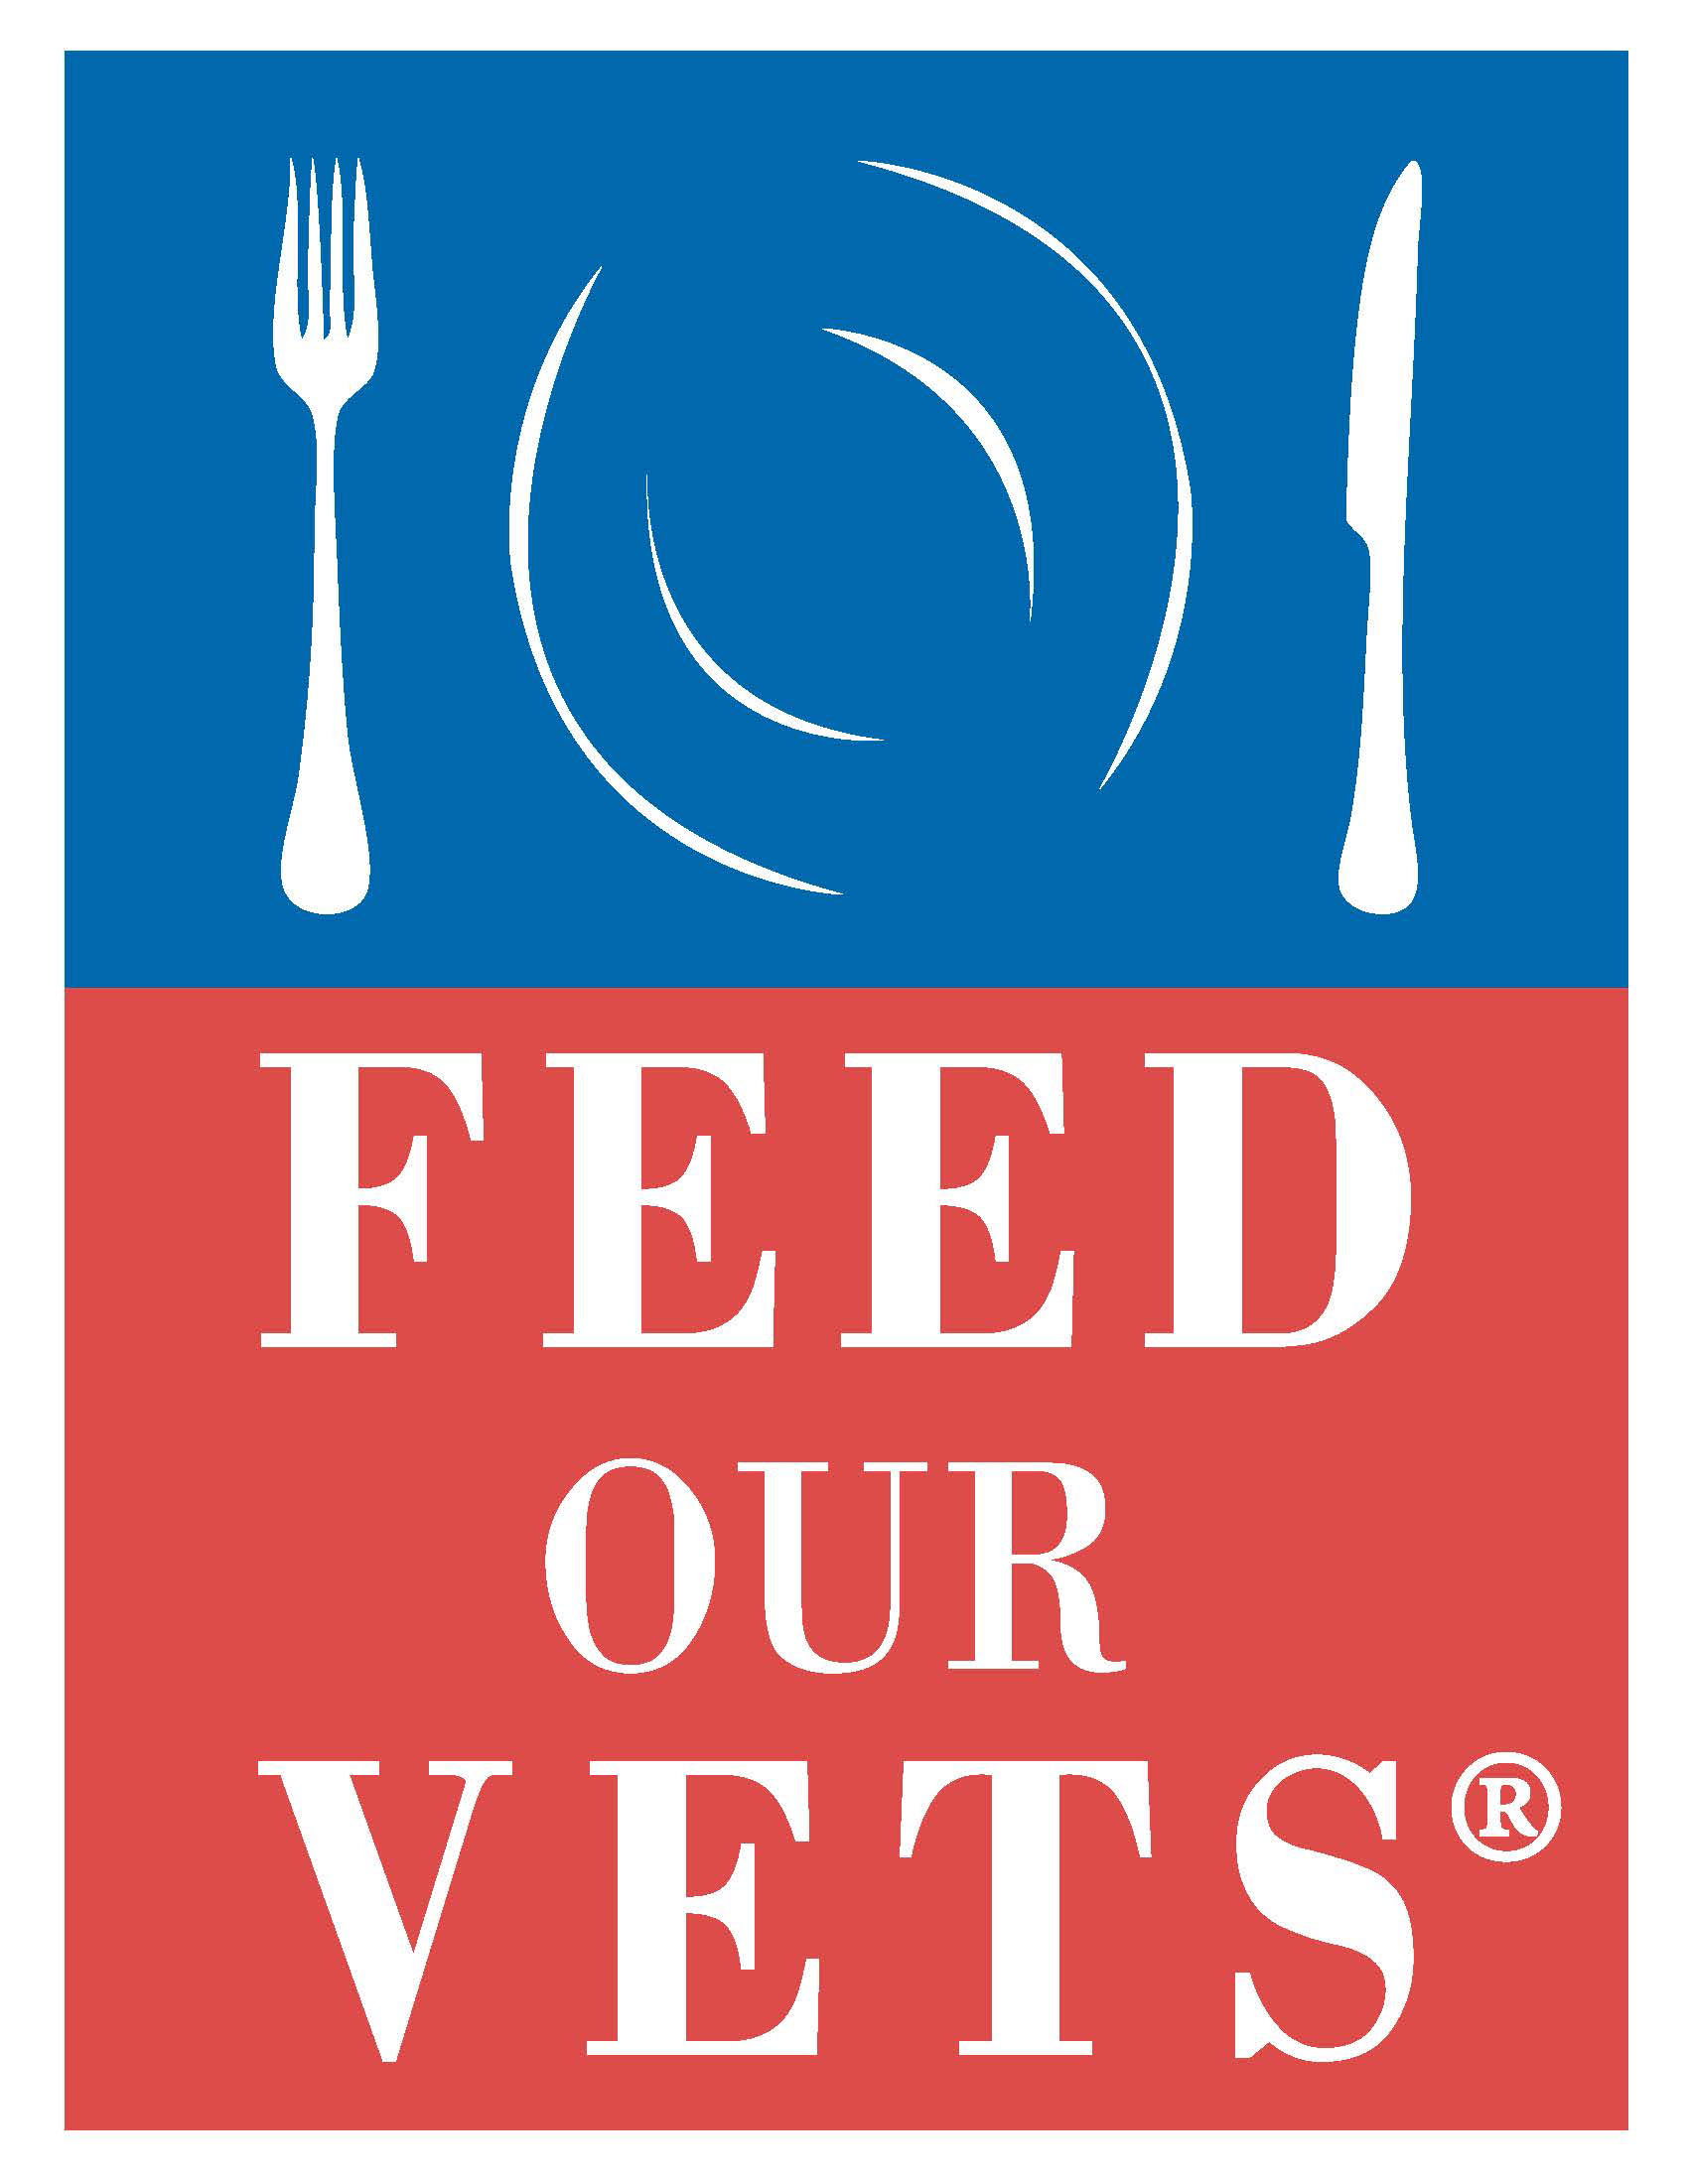 Feed our VETS Logo